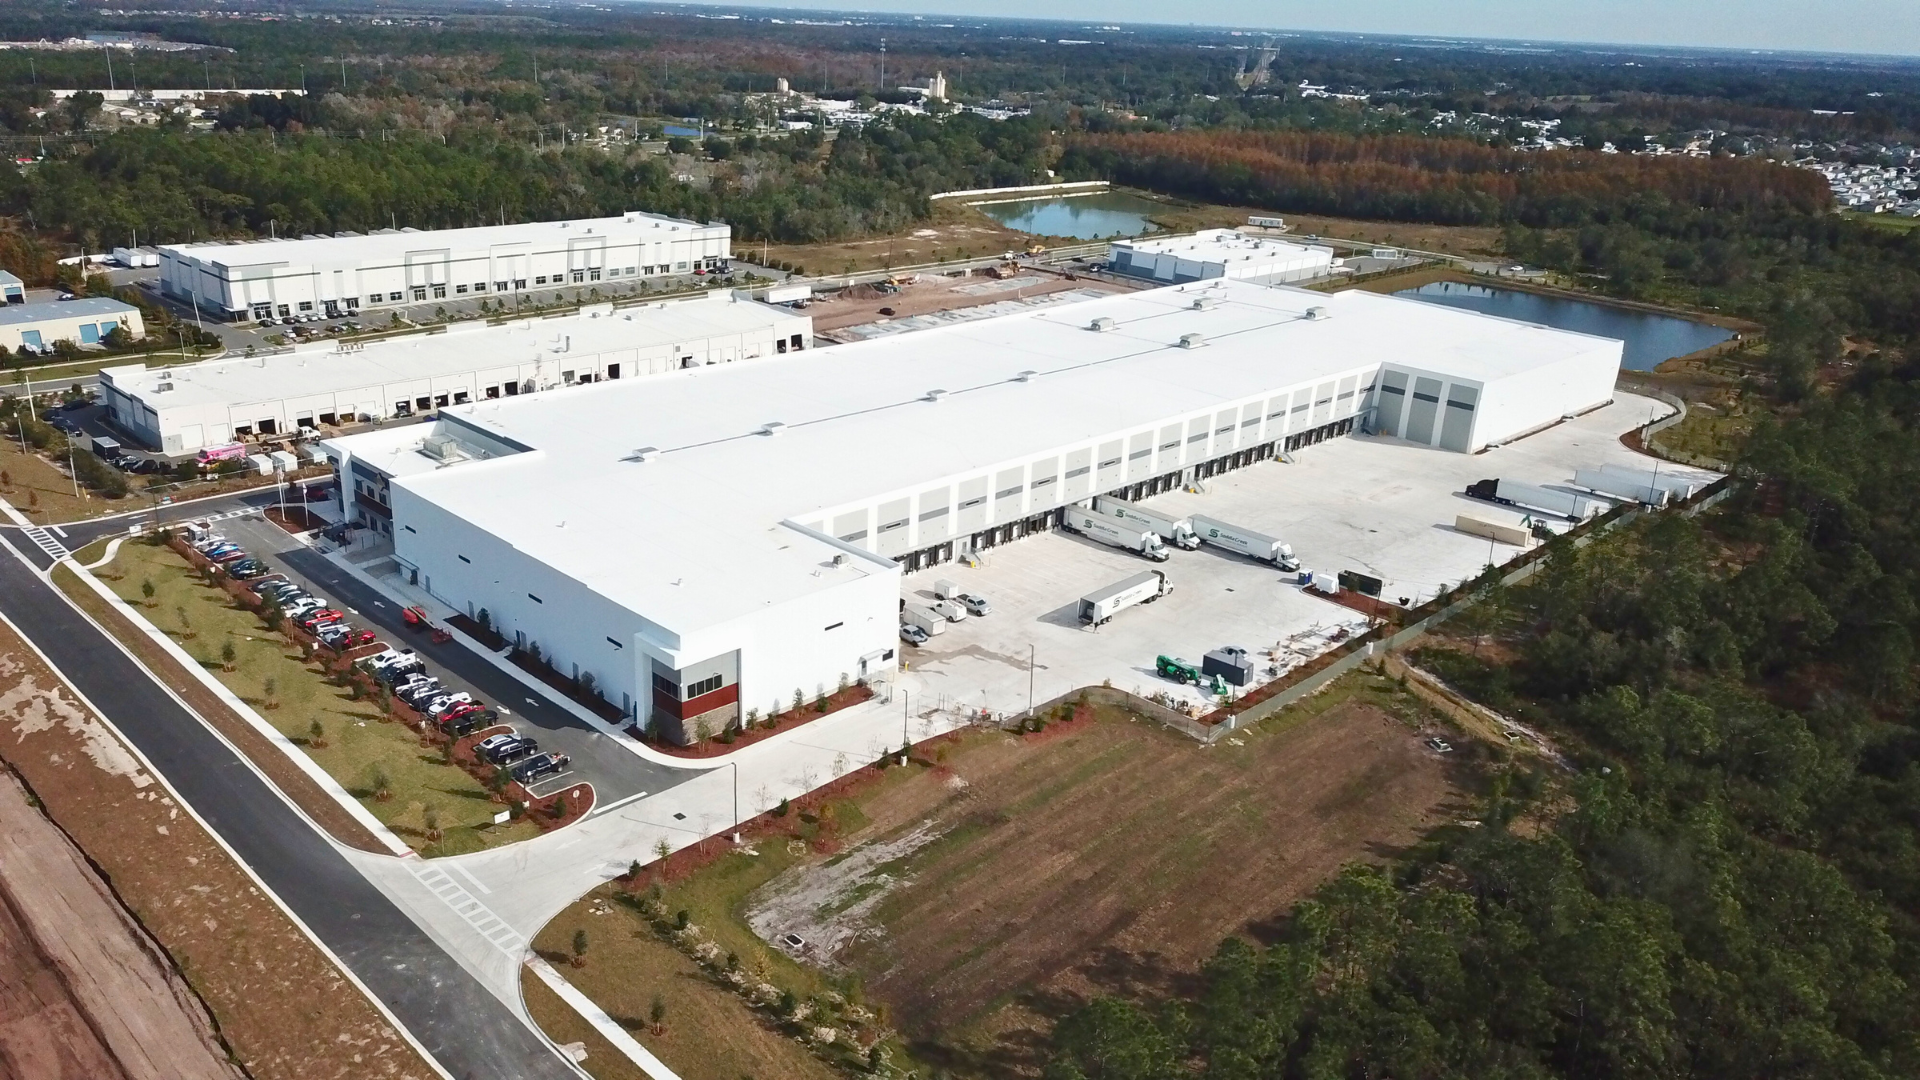 Aerial view of the Florida Distributing Company Kissimmee building